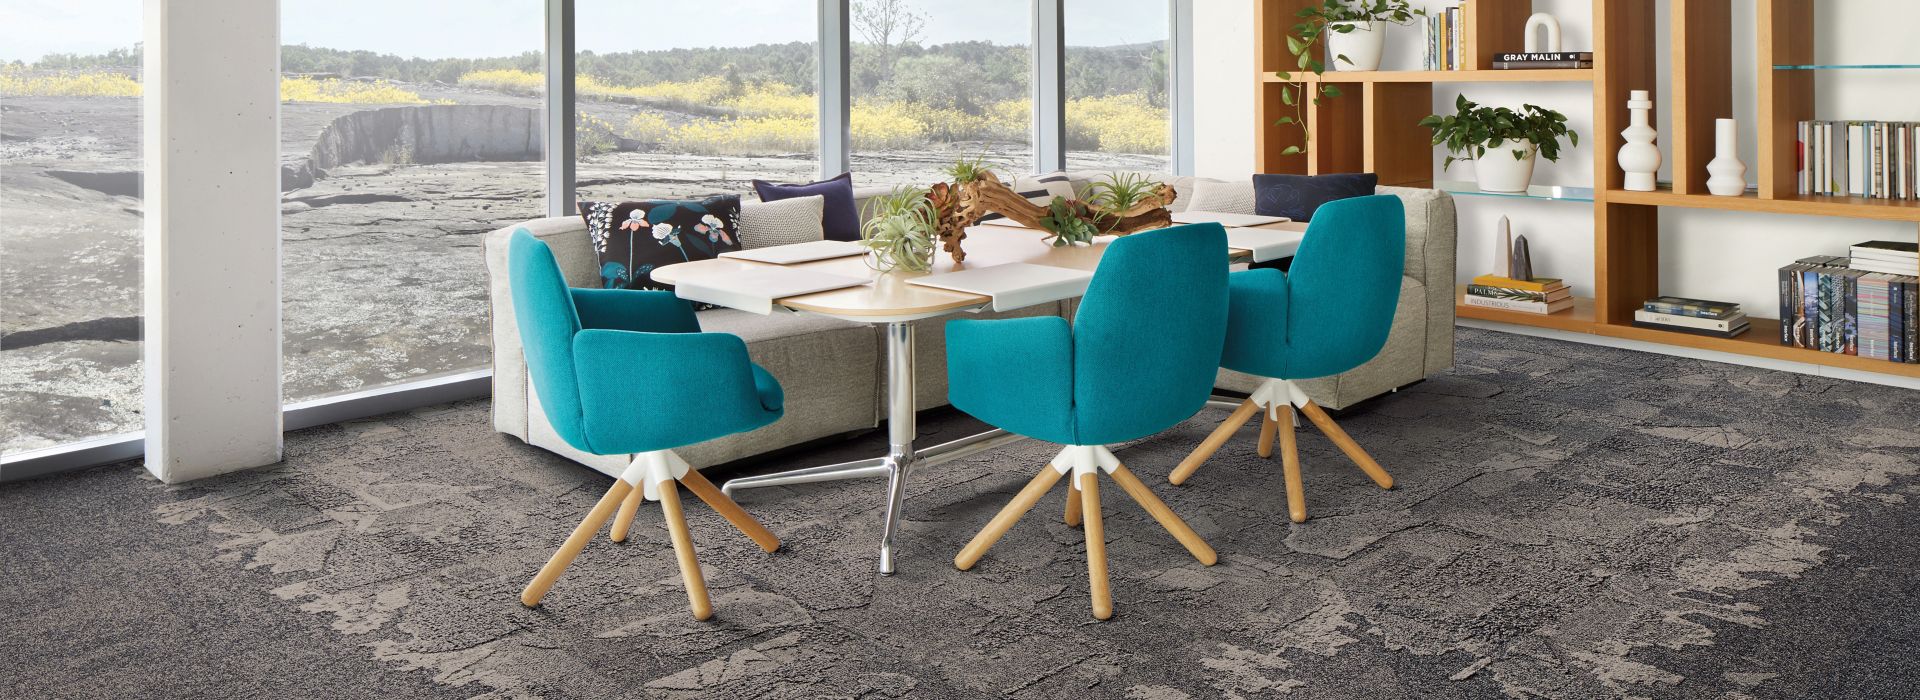 Interface Flat Rock, Bridge Creek, and Mountain Rock in private meeting room with blue chairs and large windows numéro d’image 1